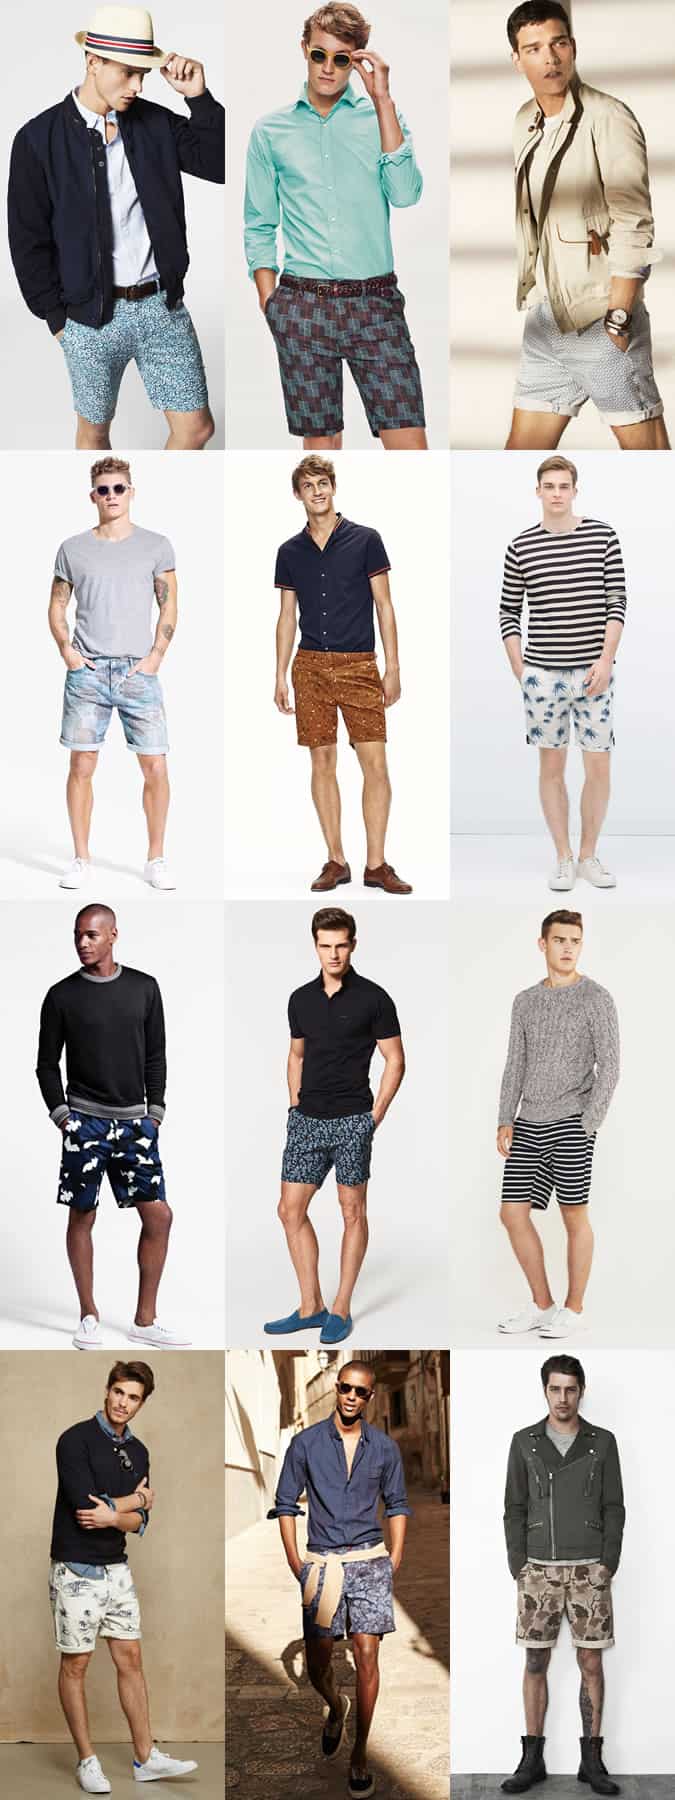 Men's Printed and Patterned Shorts Outfit Inspiration Lookbook